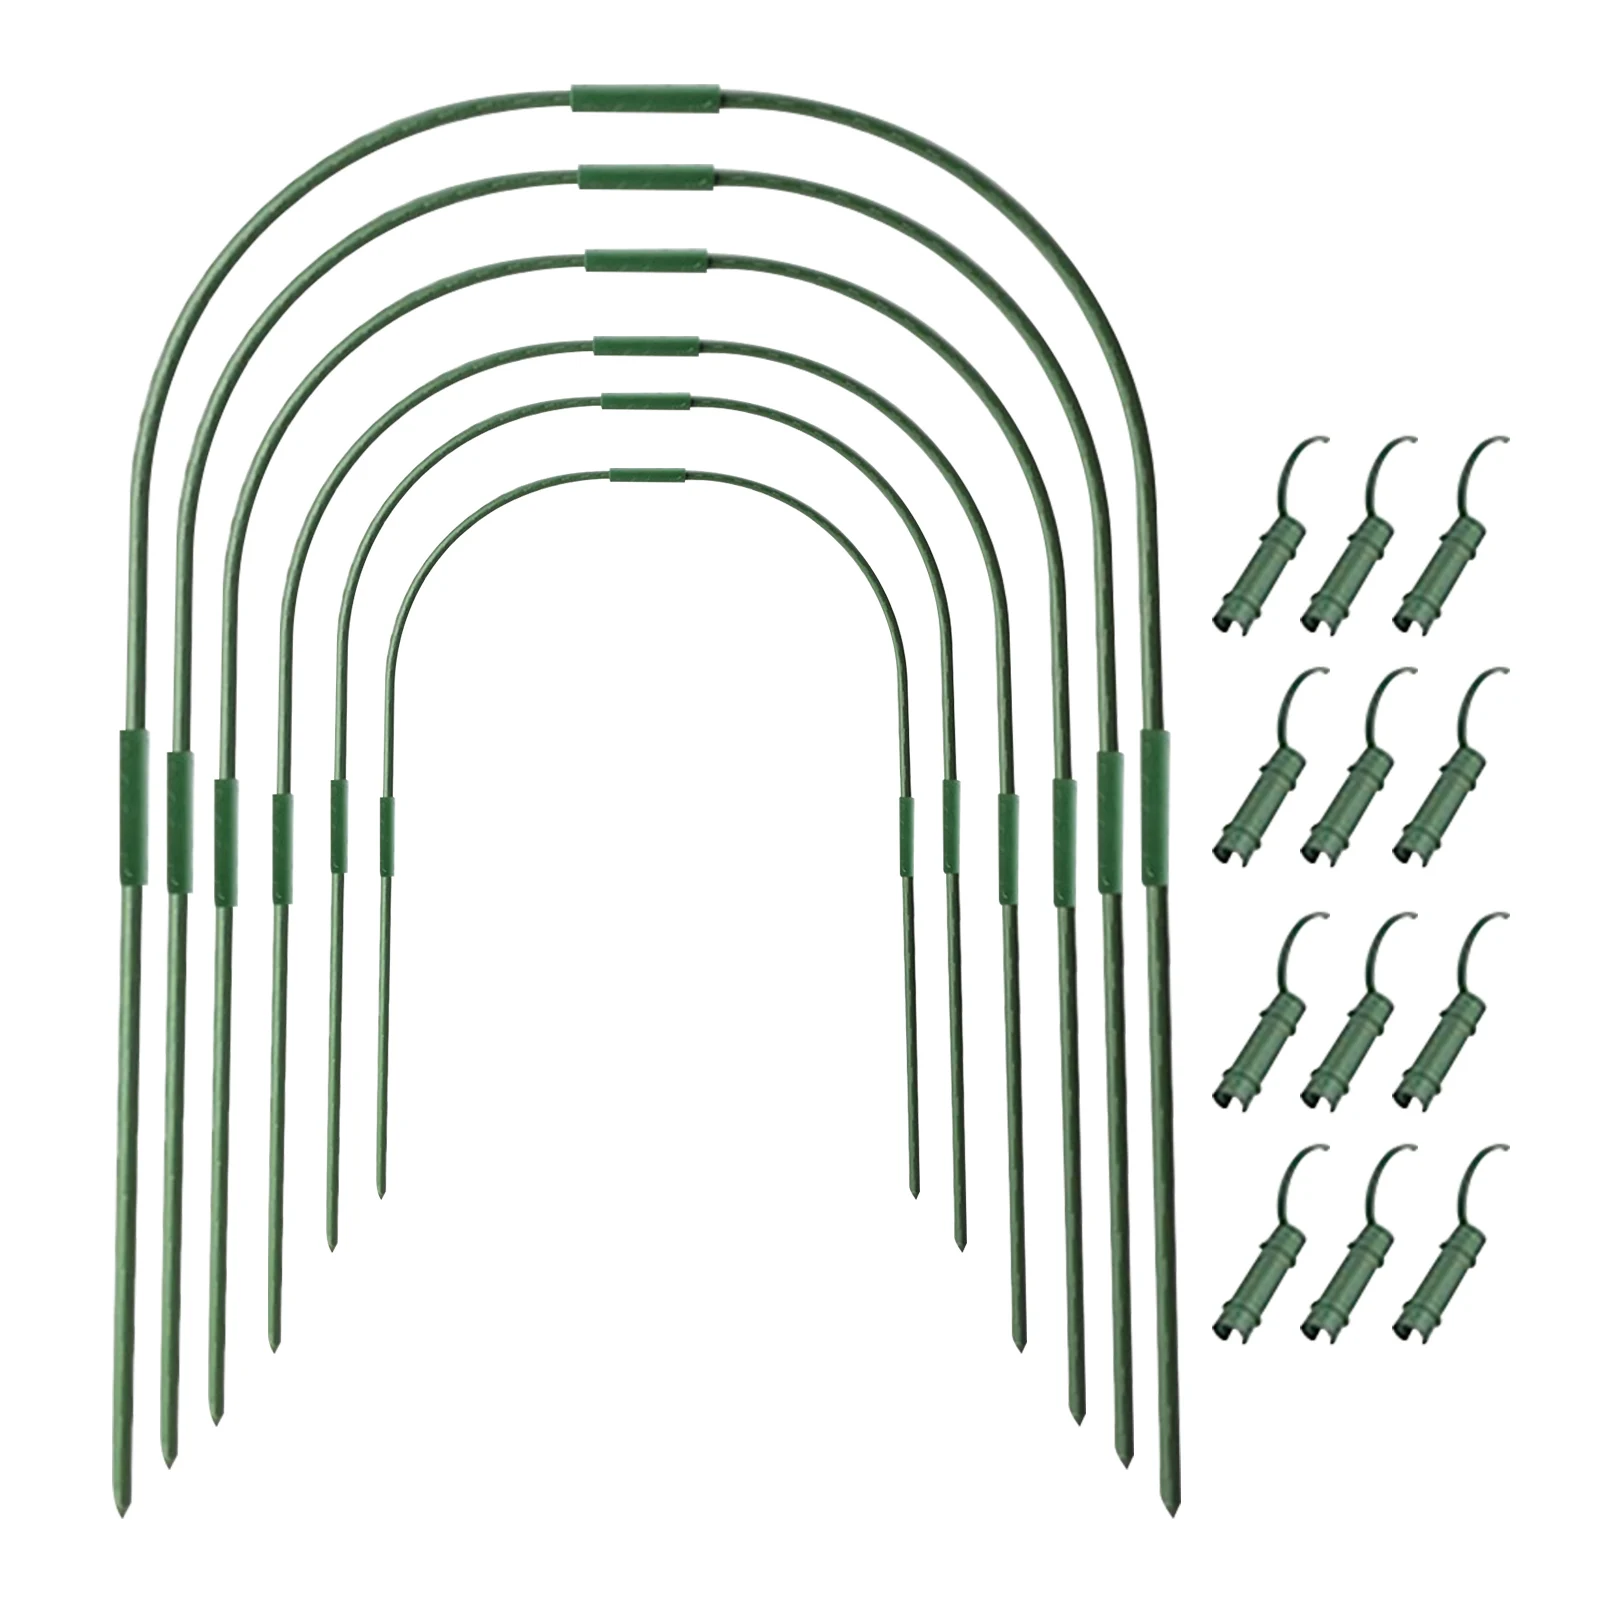 

54pcs Garden Growing Greenhouse Hoop Set Sturdy Protective Tunnel Stakes Frame Steel Row Cover Clip Plant Support Connector DIY